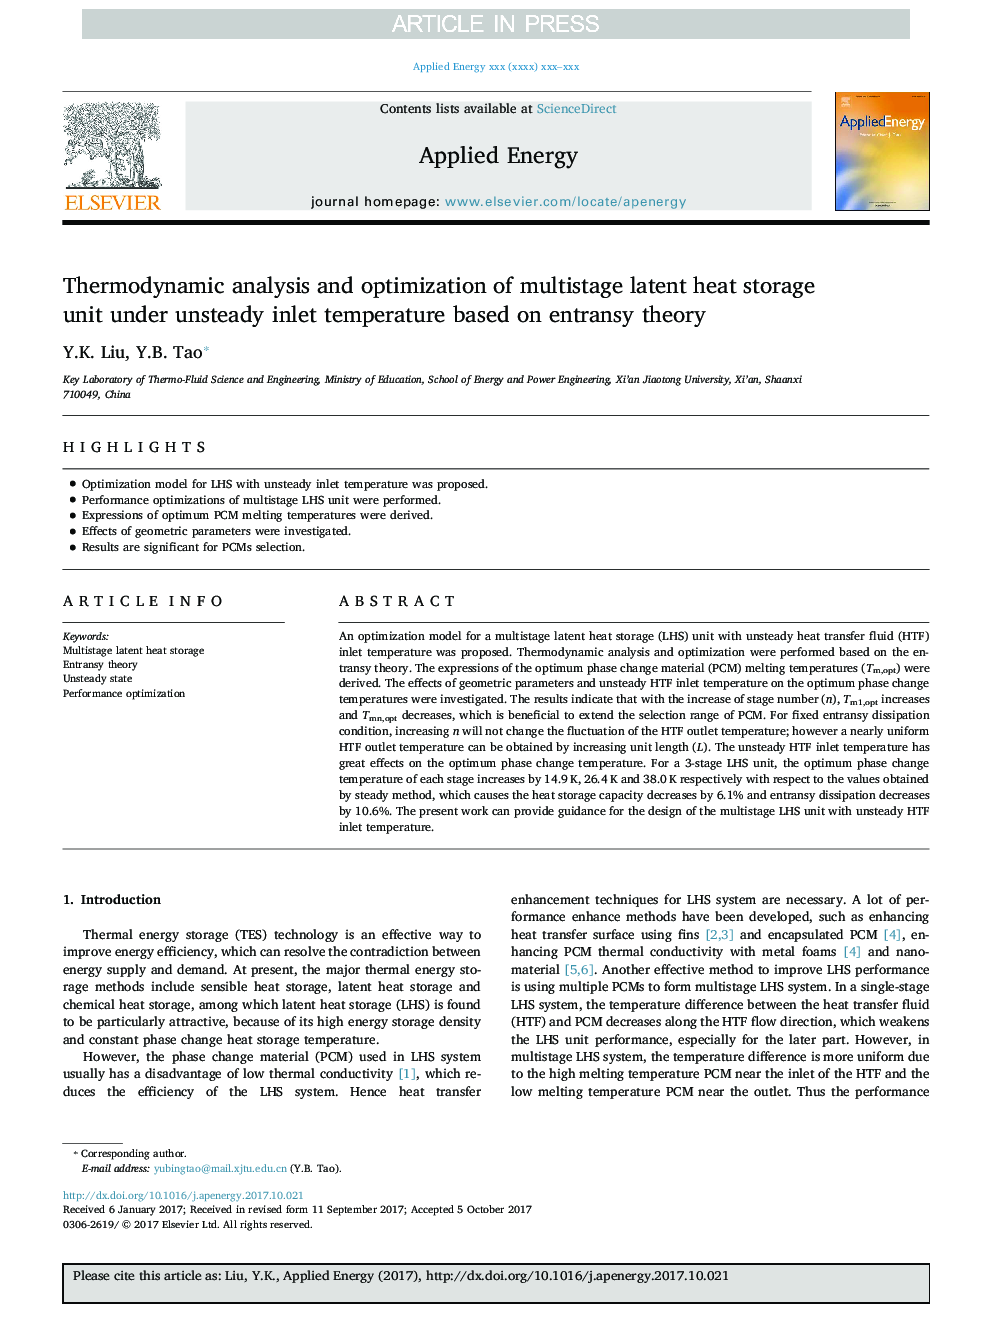 Thermodynamic analysis and optimization of multistage latent heat storage unit under unsteady inlet temperature based on entransy theory